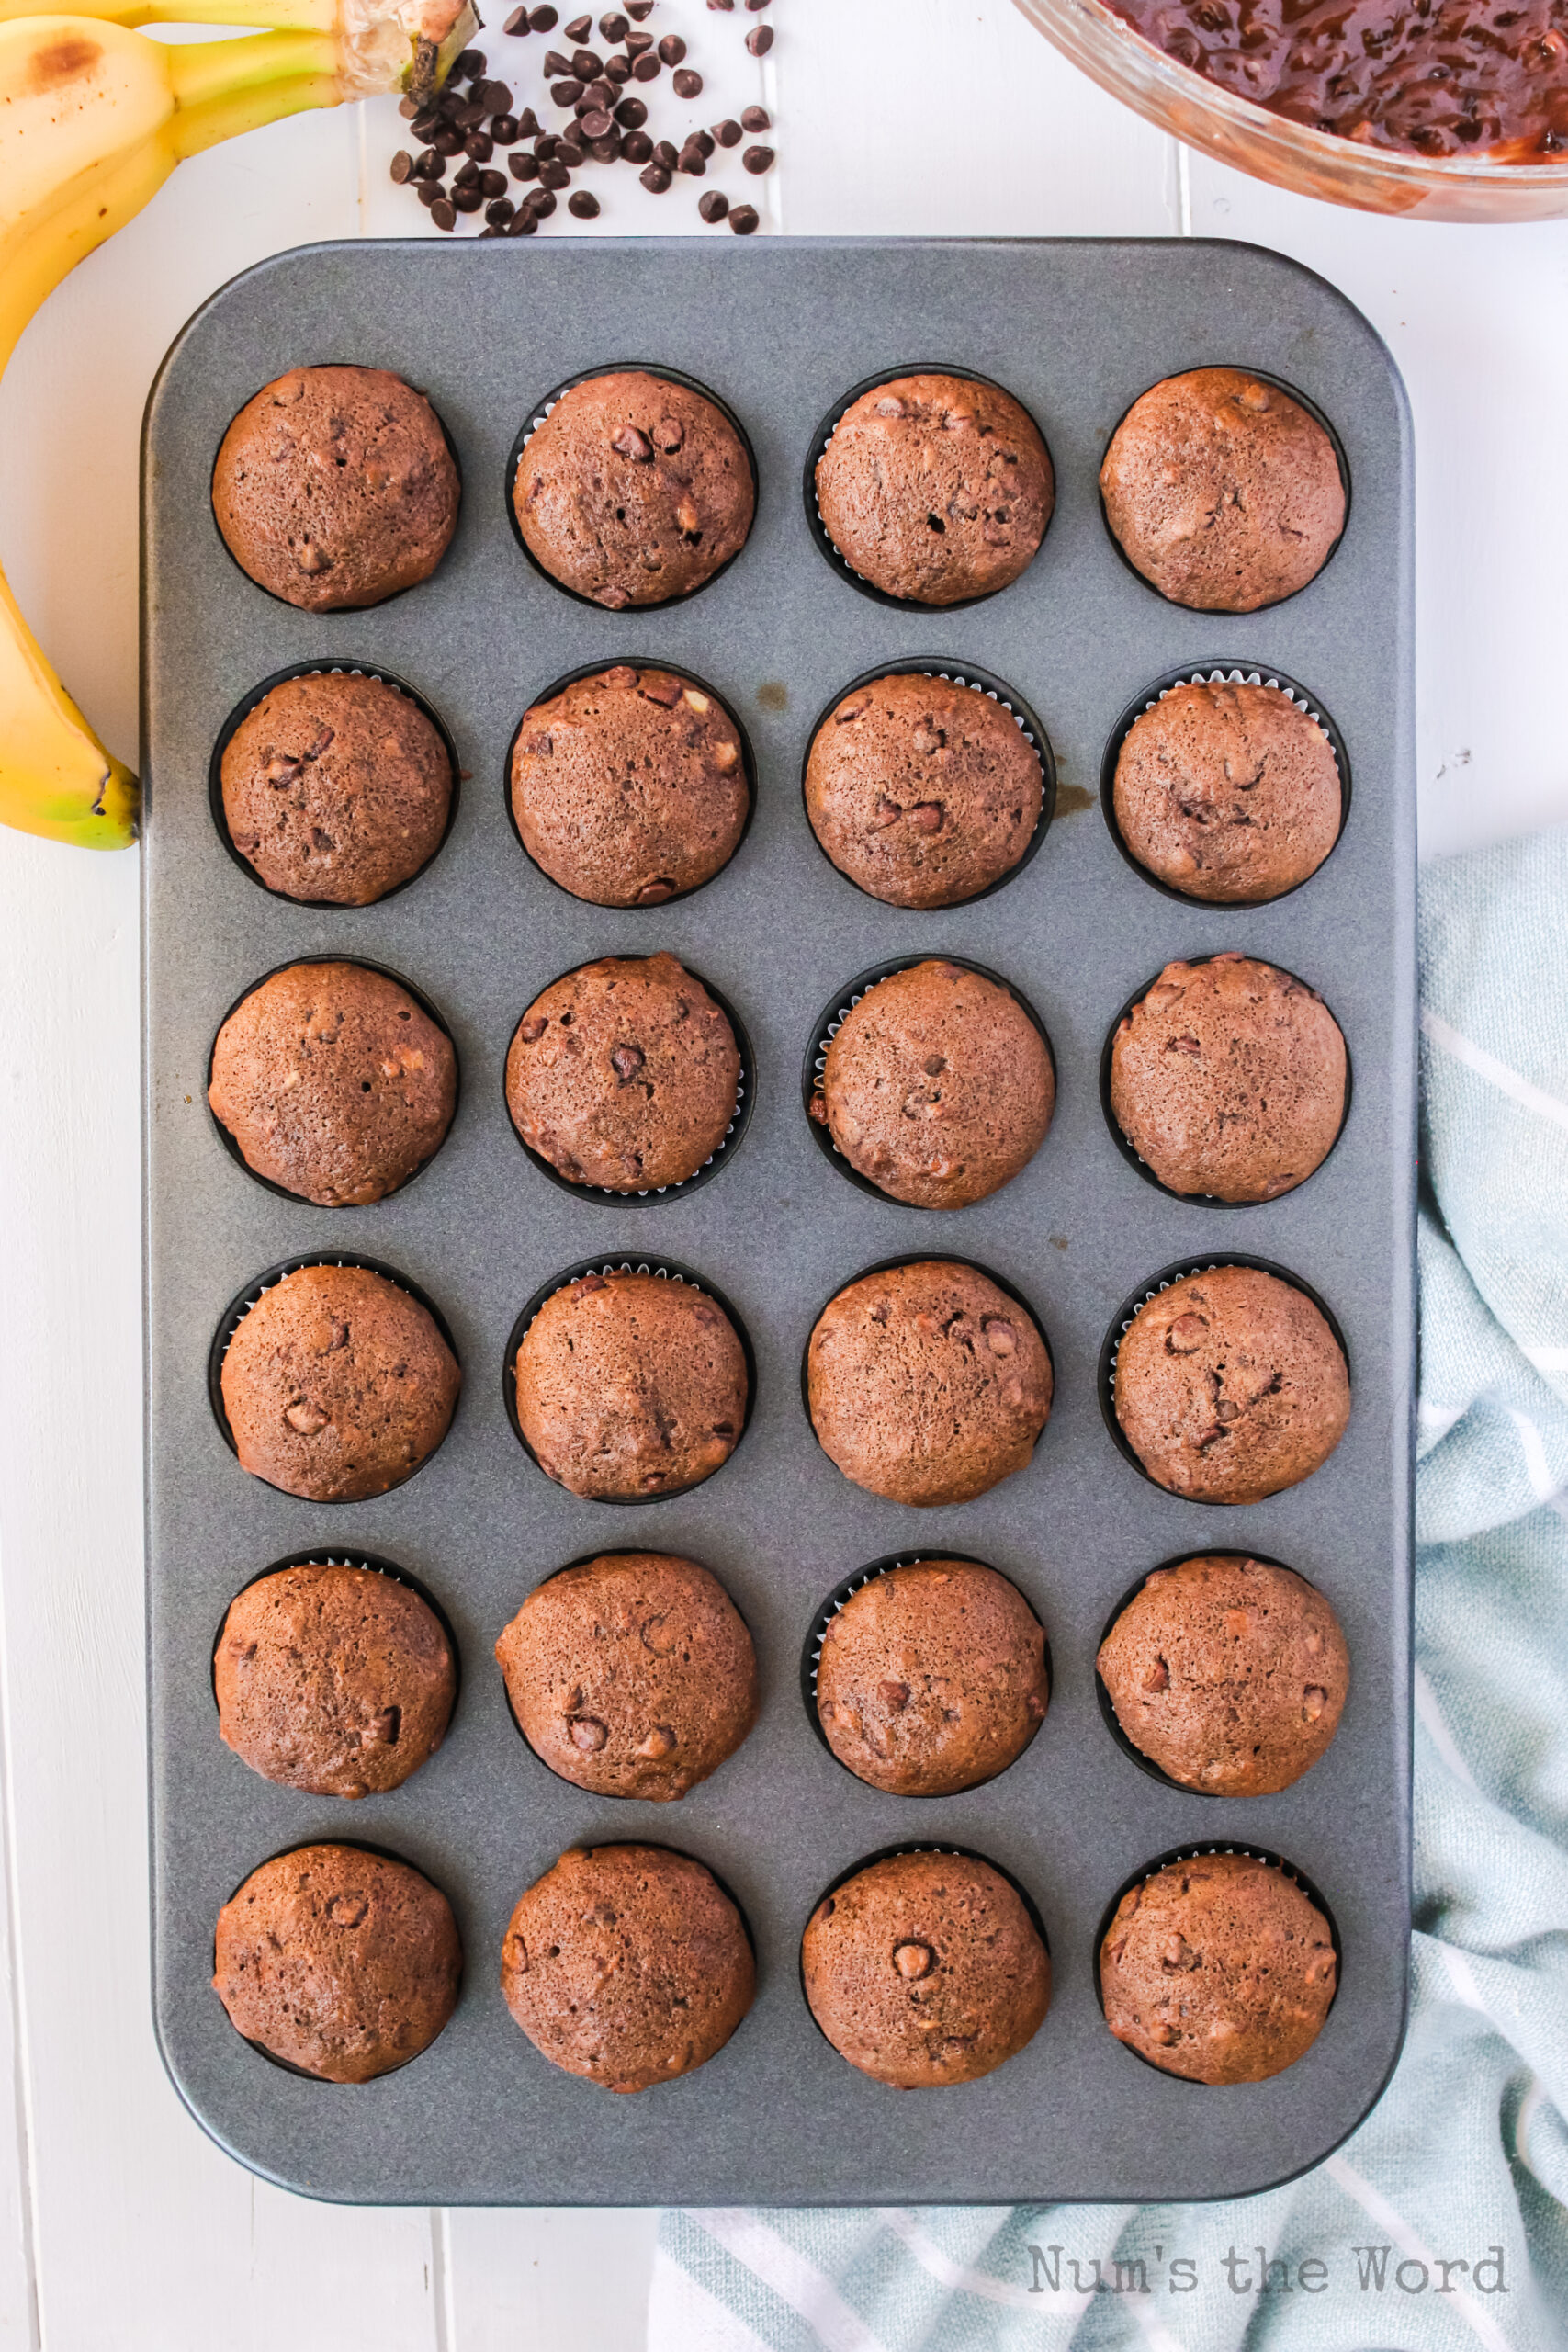 24 mini muffins in a pan, baked